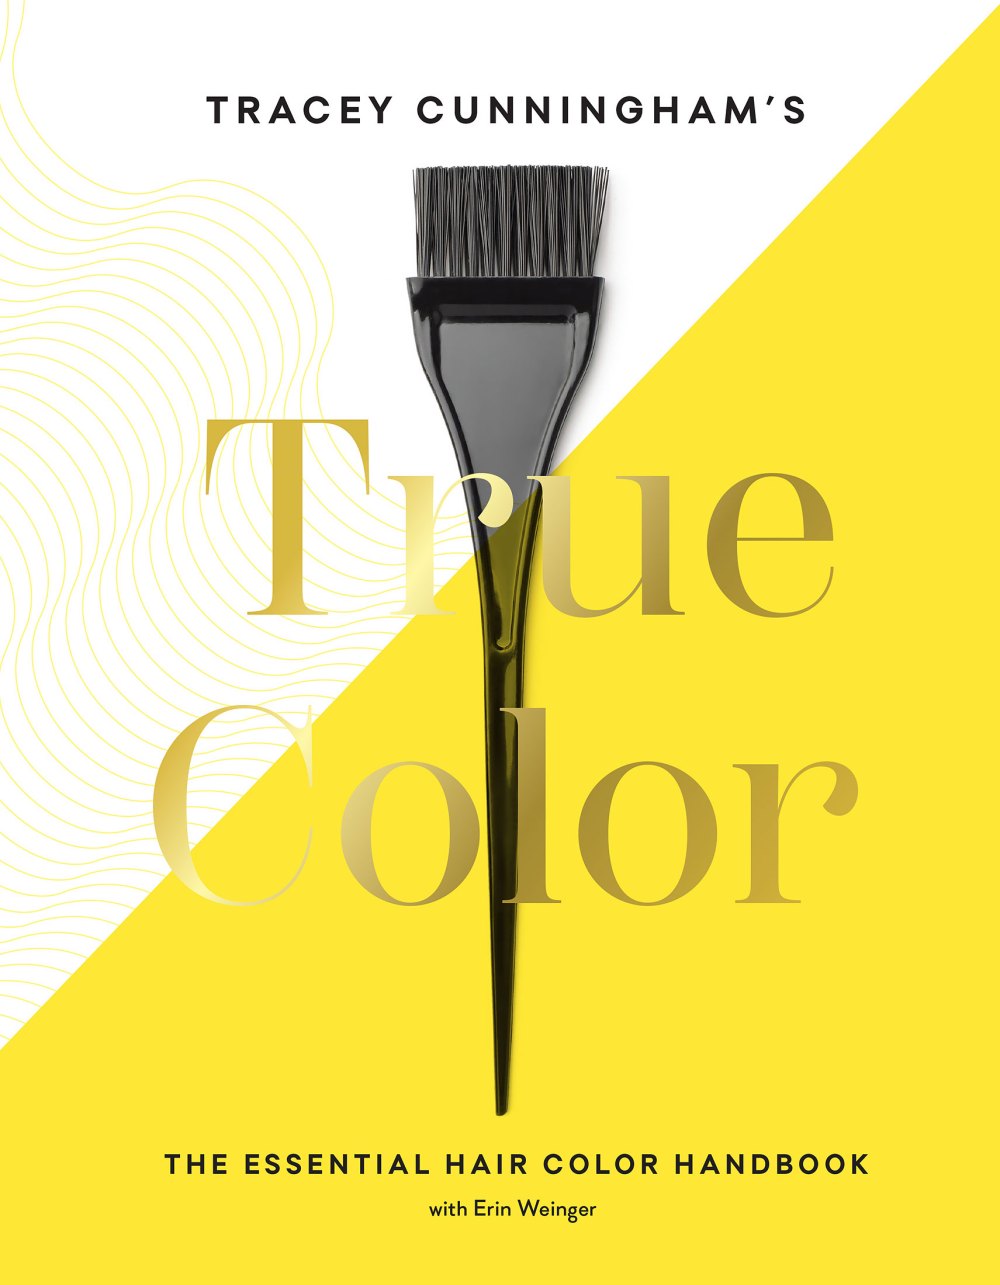 Hollywood Hairstylist Tracey Cunnigham: How to Find the Perfect Hair Color